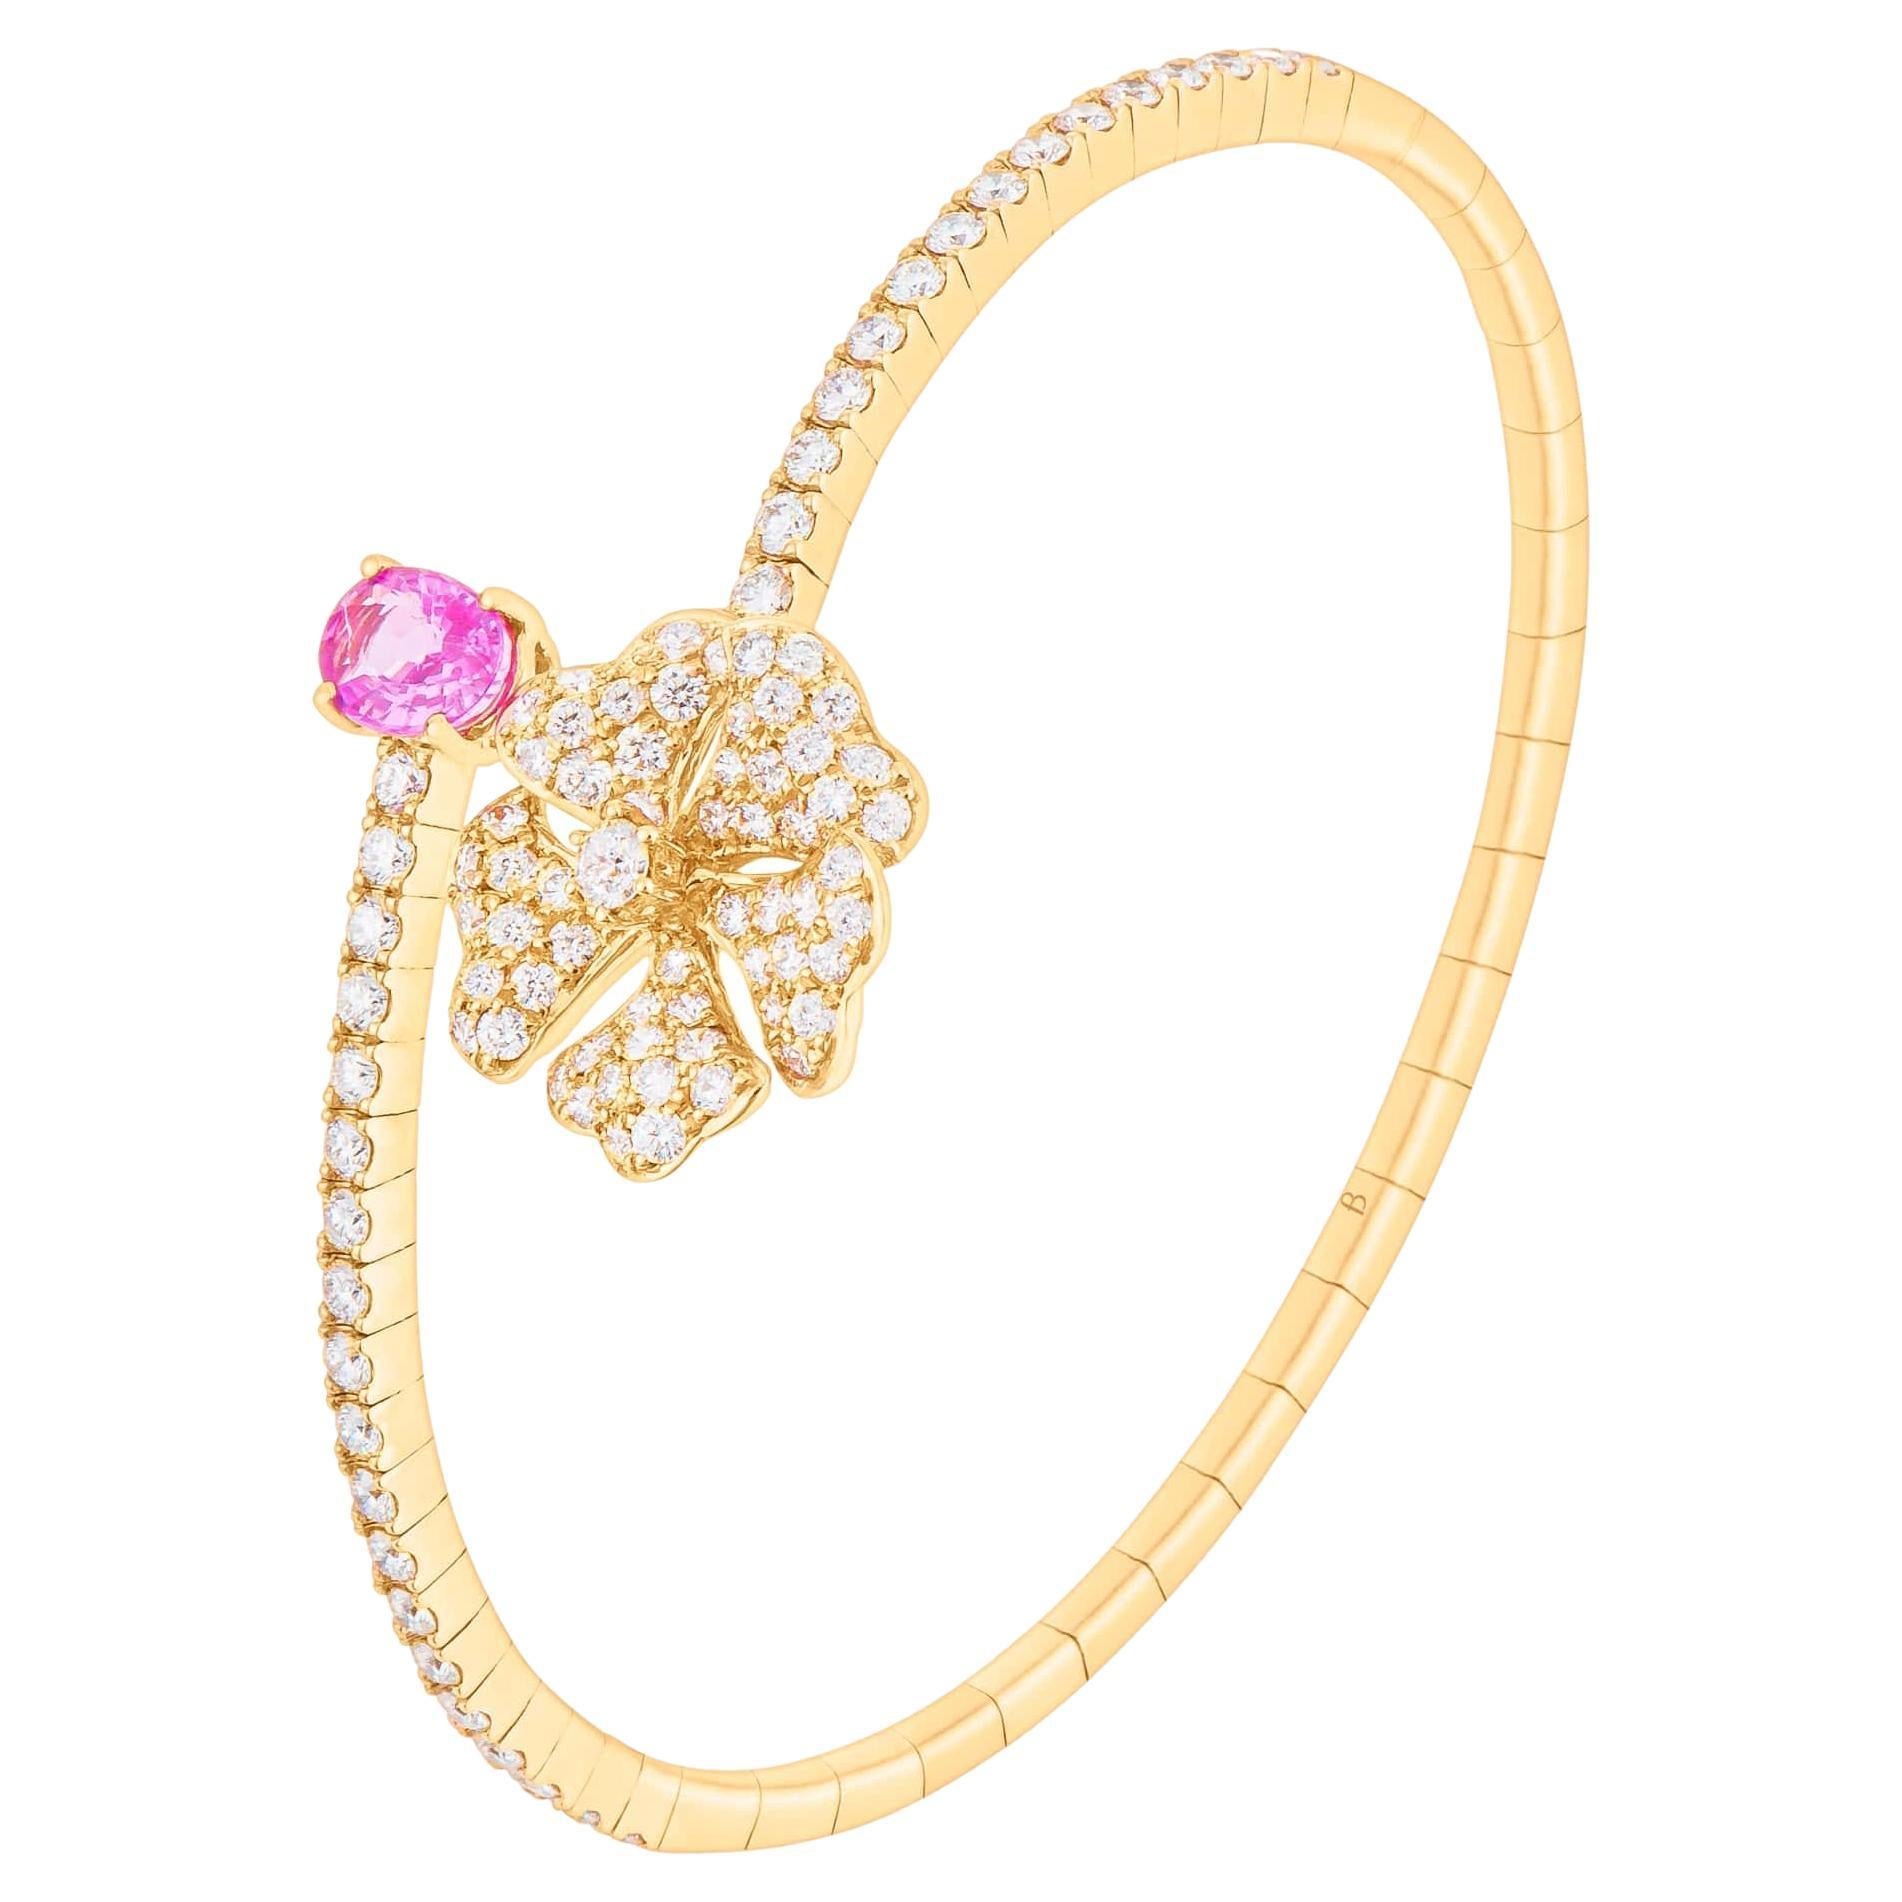 Bloom Pink Sapphire and Diamond Open Spiral Bangle in 18k Yellow Gold